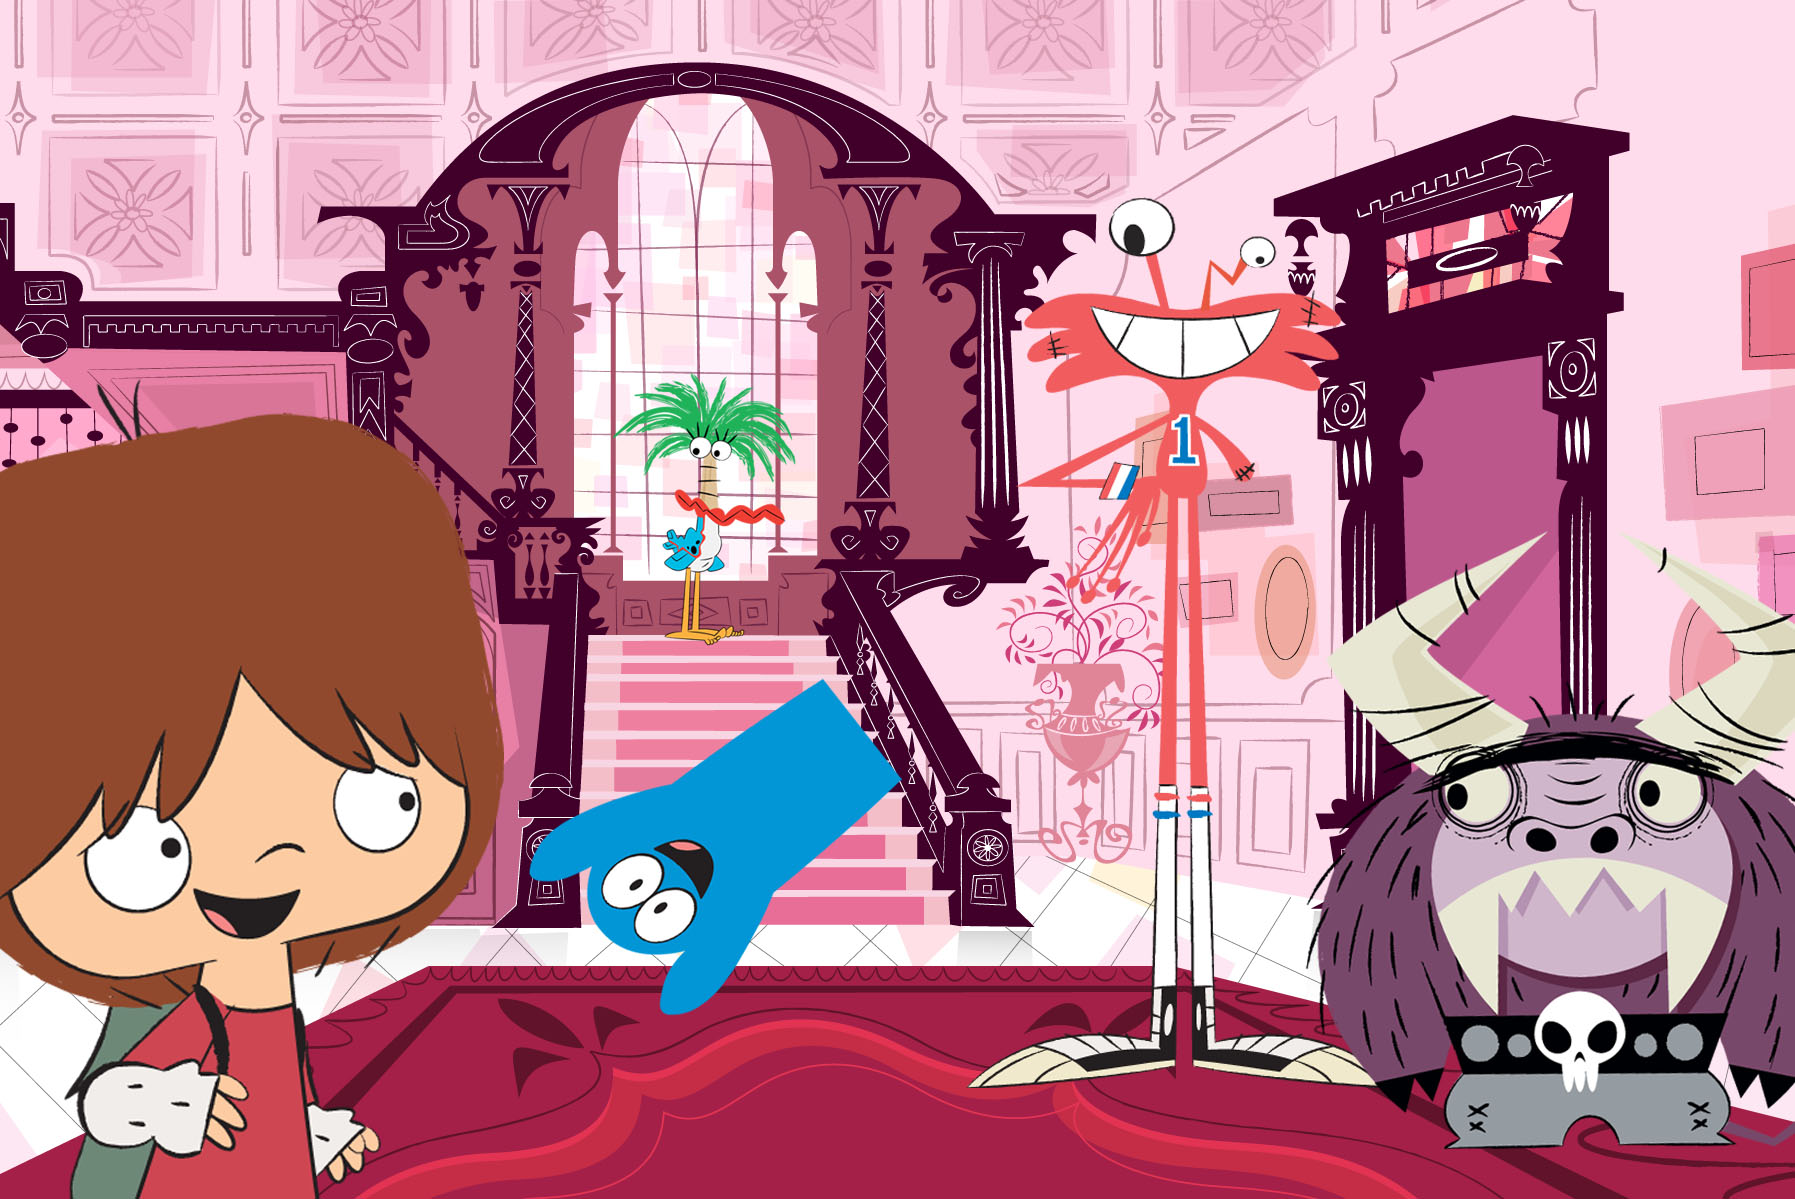 [76+] Fosters Home For Imaginary Friends Wallpaper on WallpaperSafari
